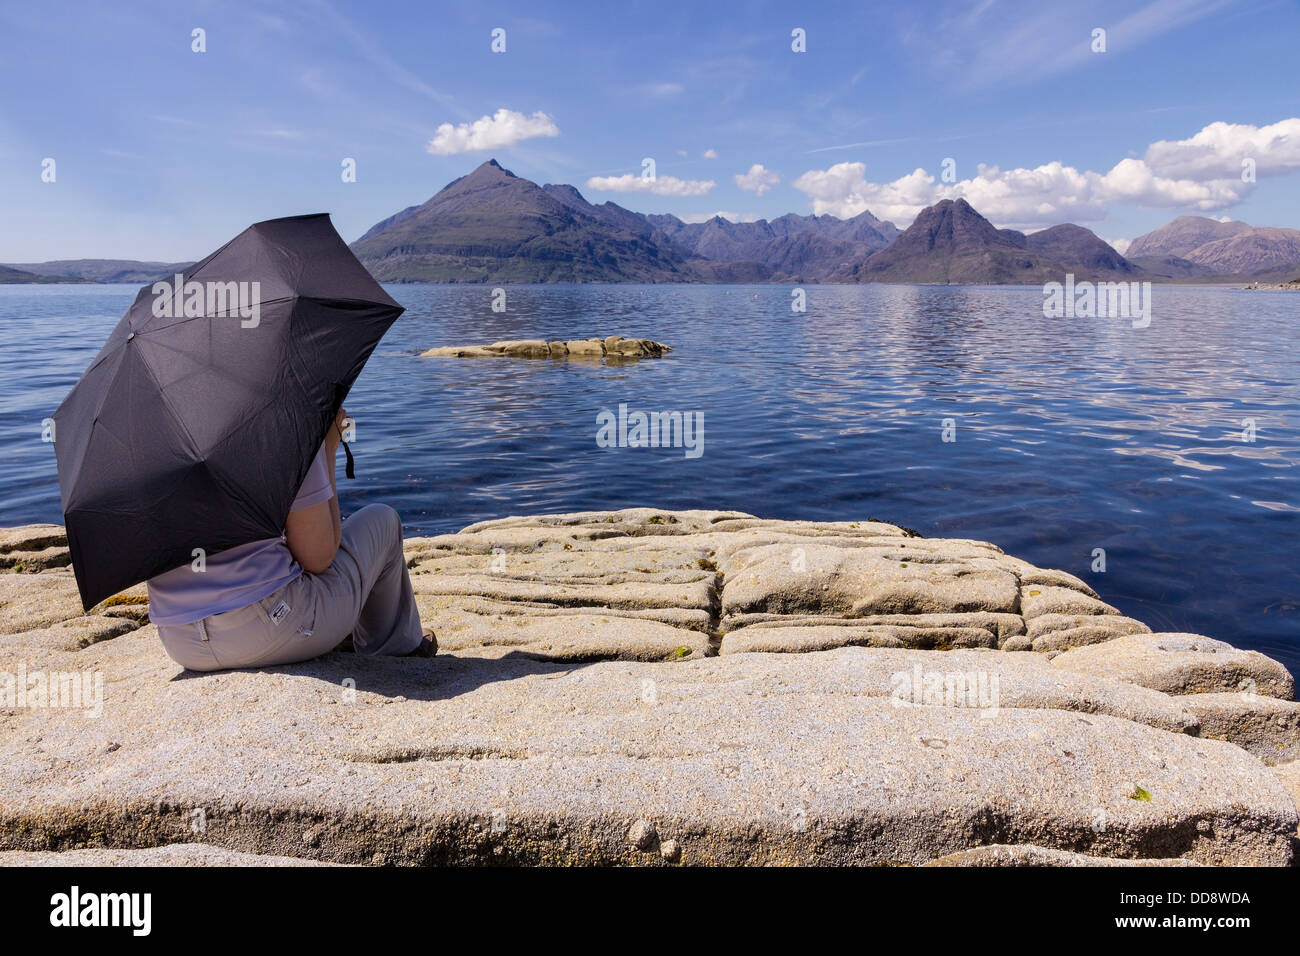 Holidaymaker under sunshade admiring view of Loch Scavaig and the Black Cuillin mountains, Elgol, Isle of Skye, Scotland, UK Stock Photo